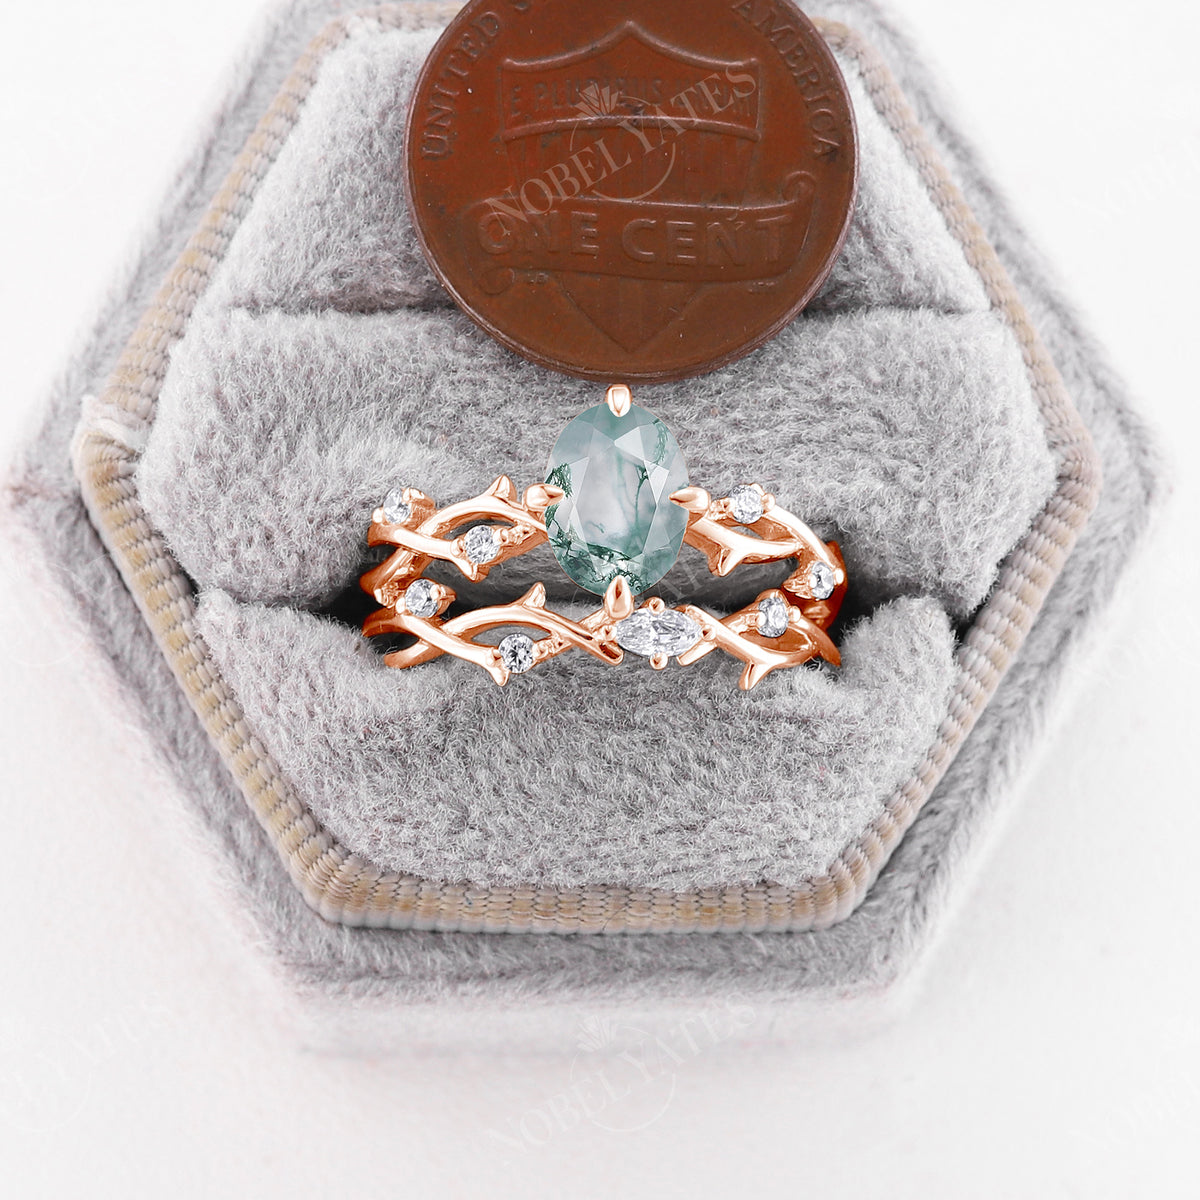 Nature Twig & Branch Oval Moss Agate Rose Gold Engagement Ring Set Half Eternity